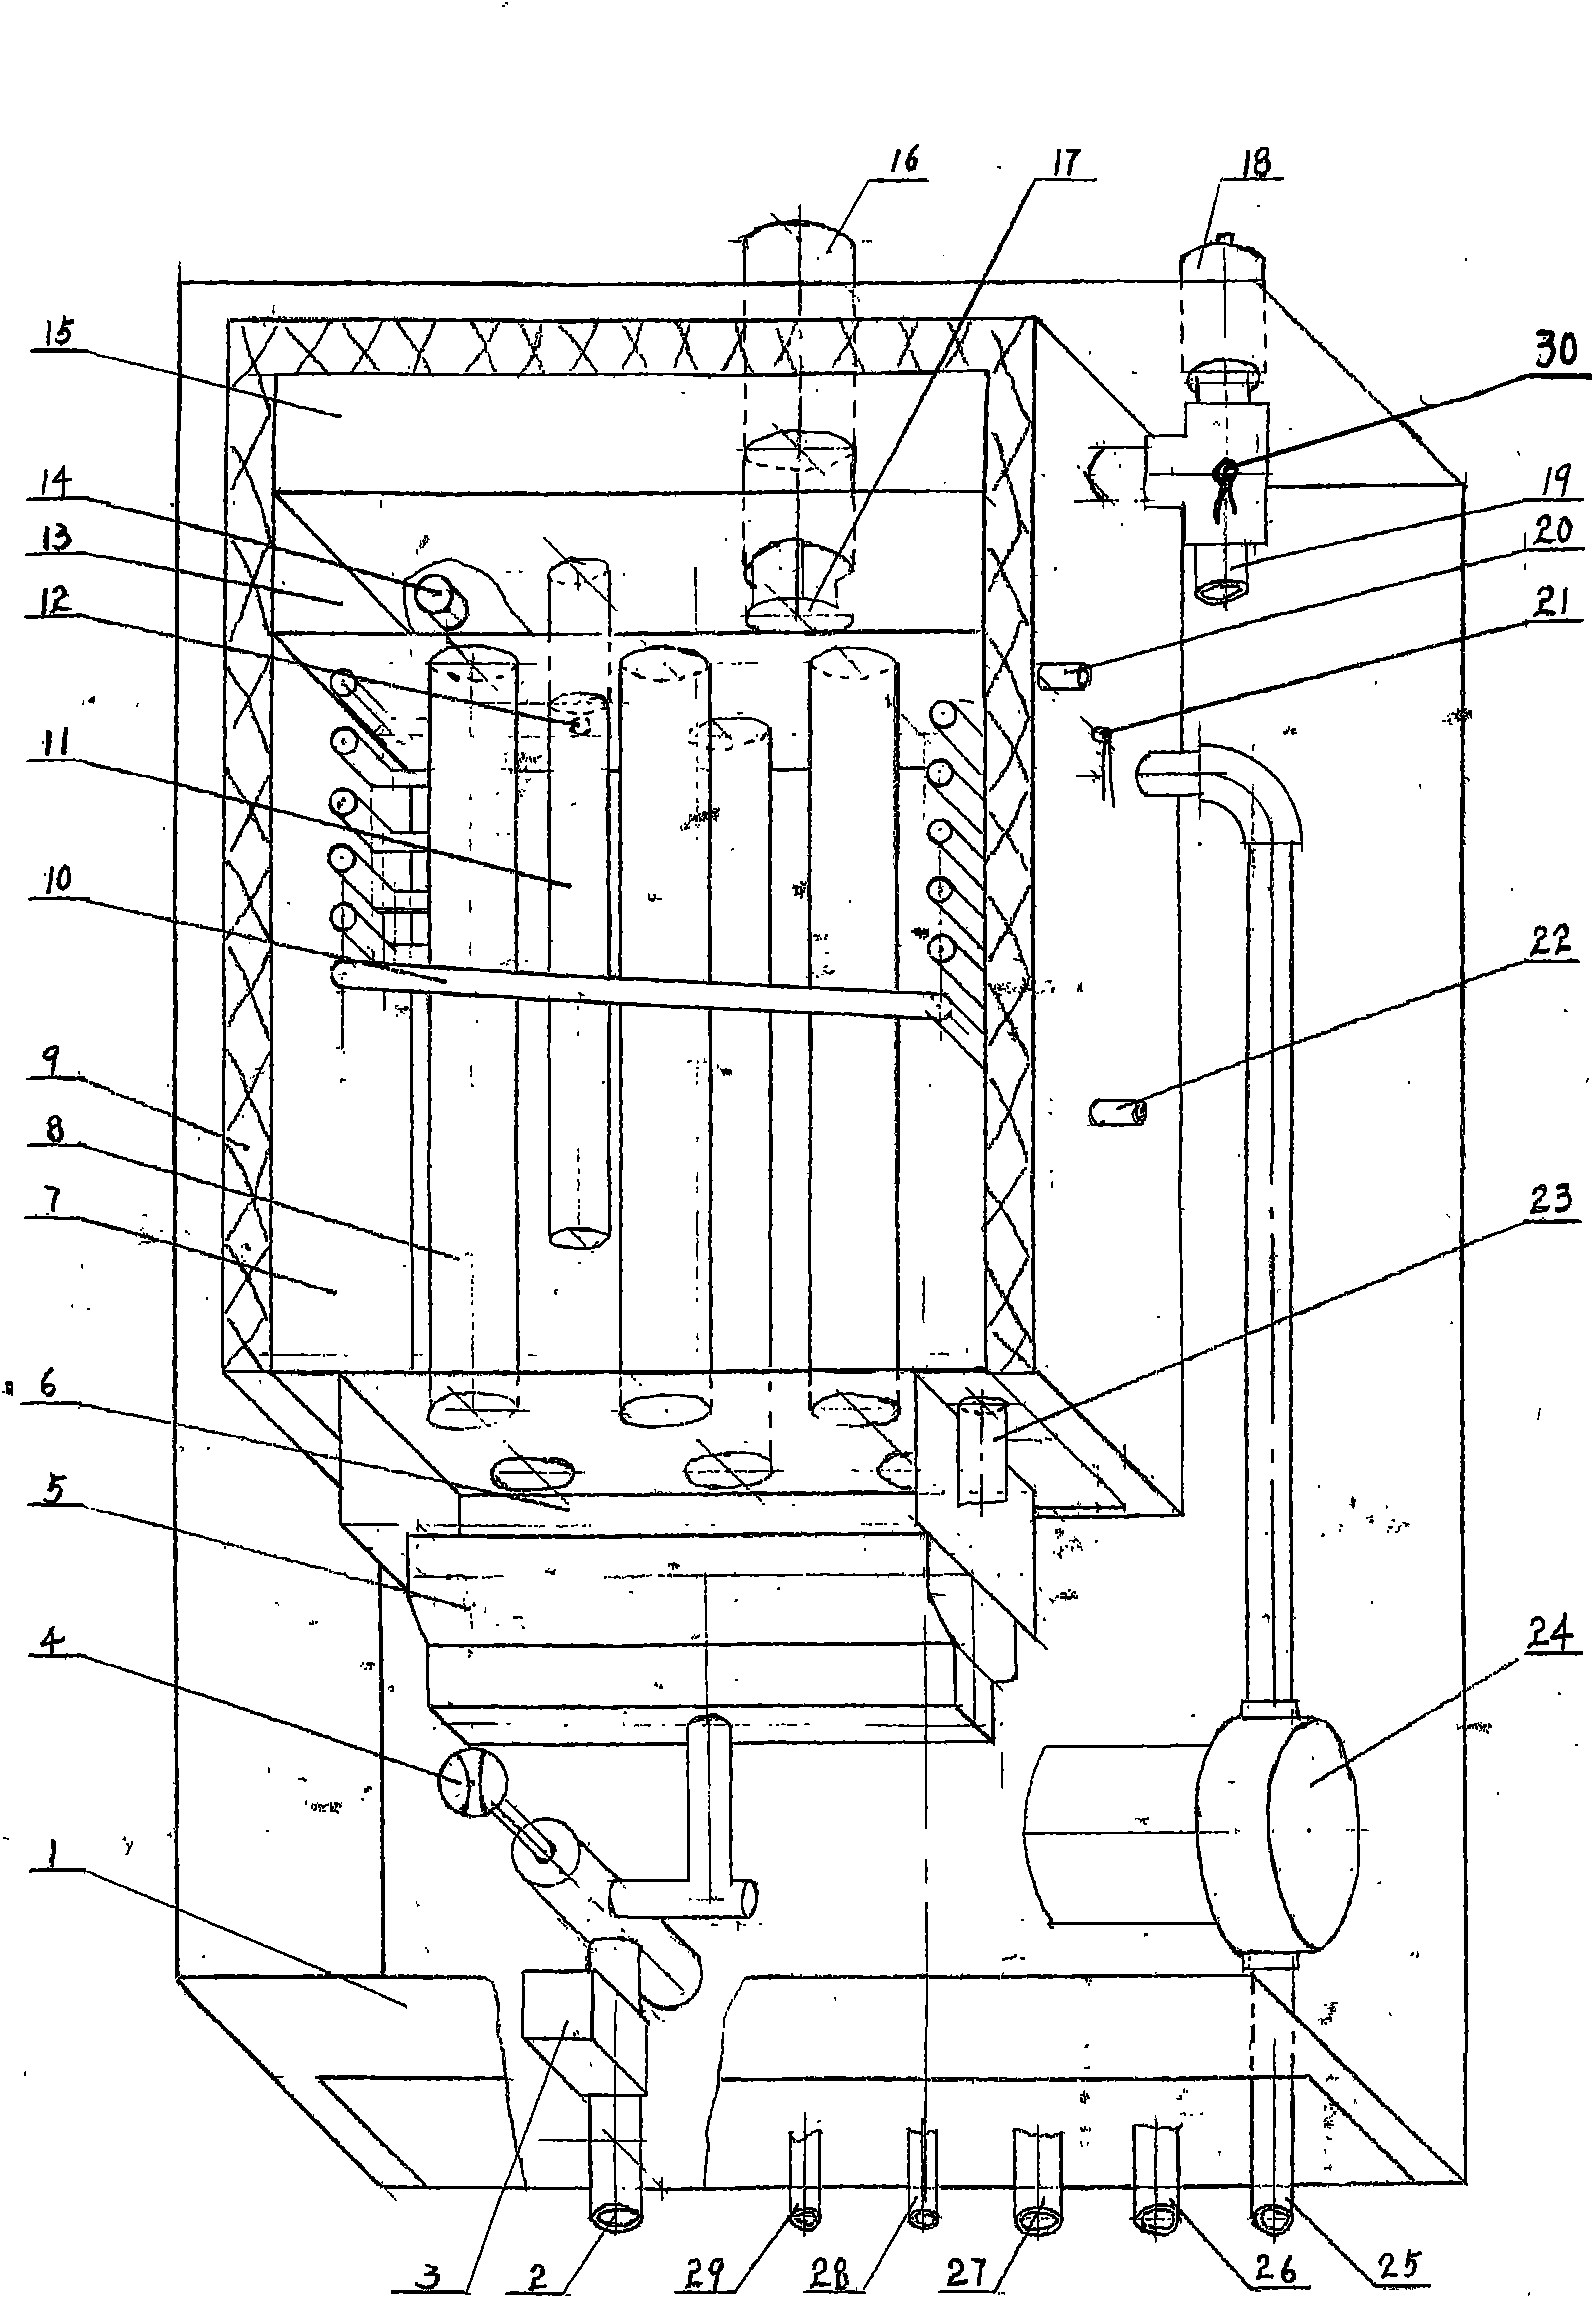 Heating and bathing gas water heater for double volume and condensation heat exchange system